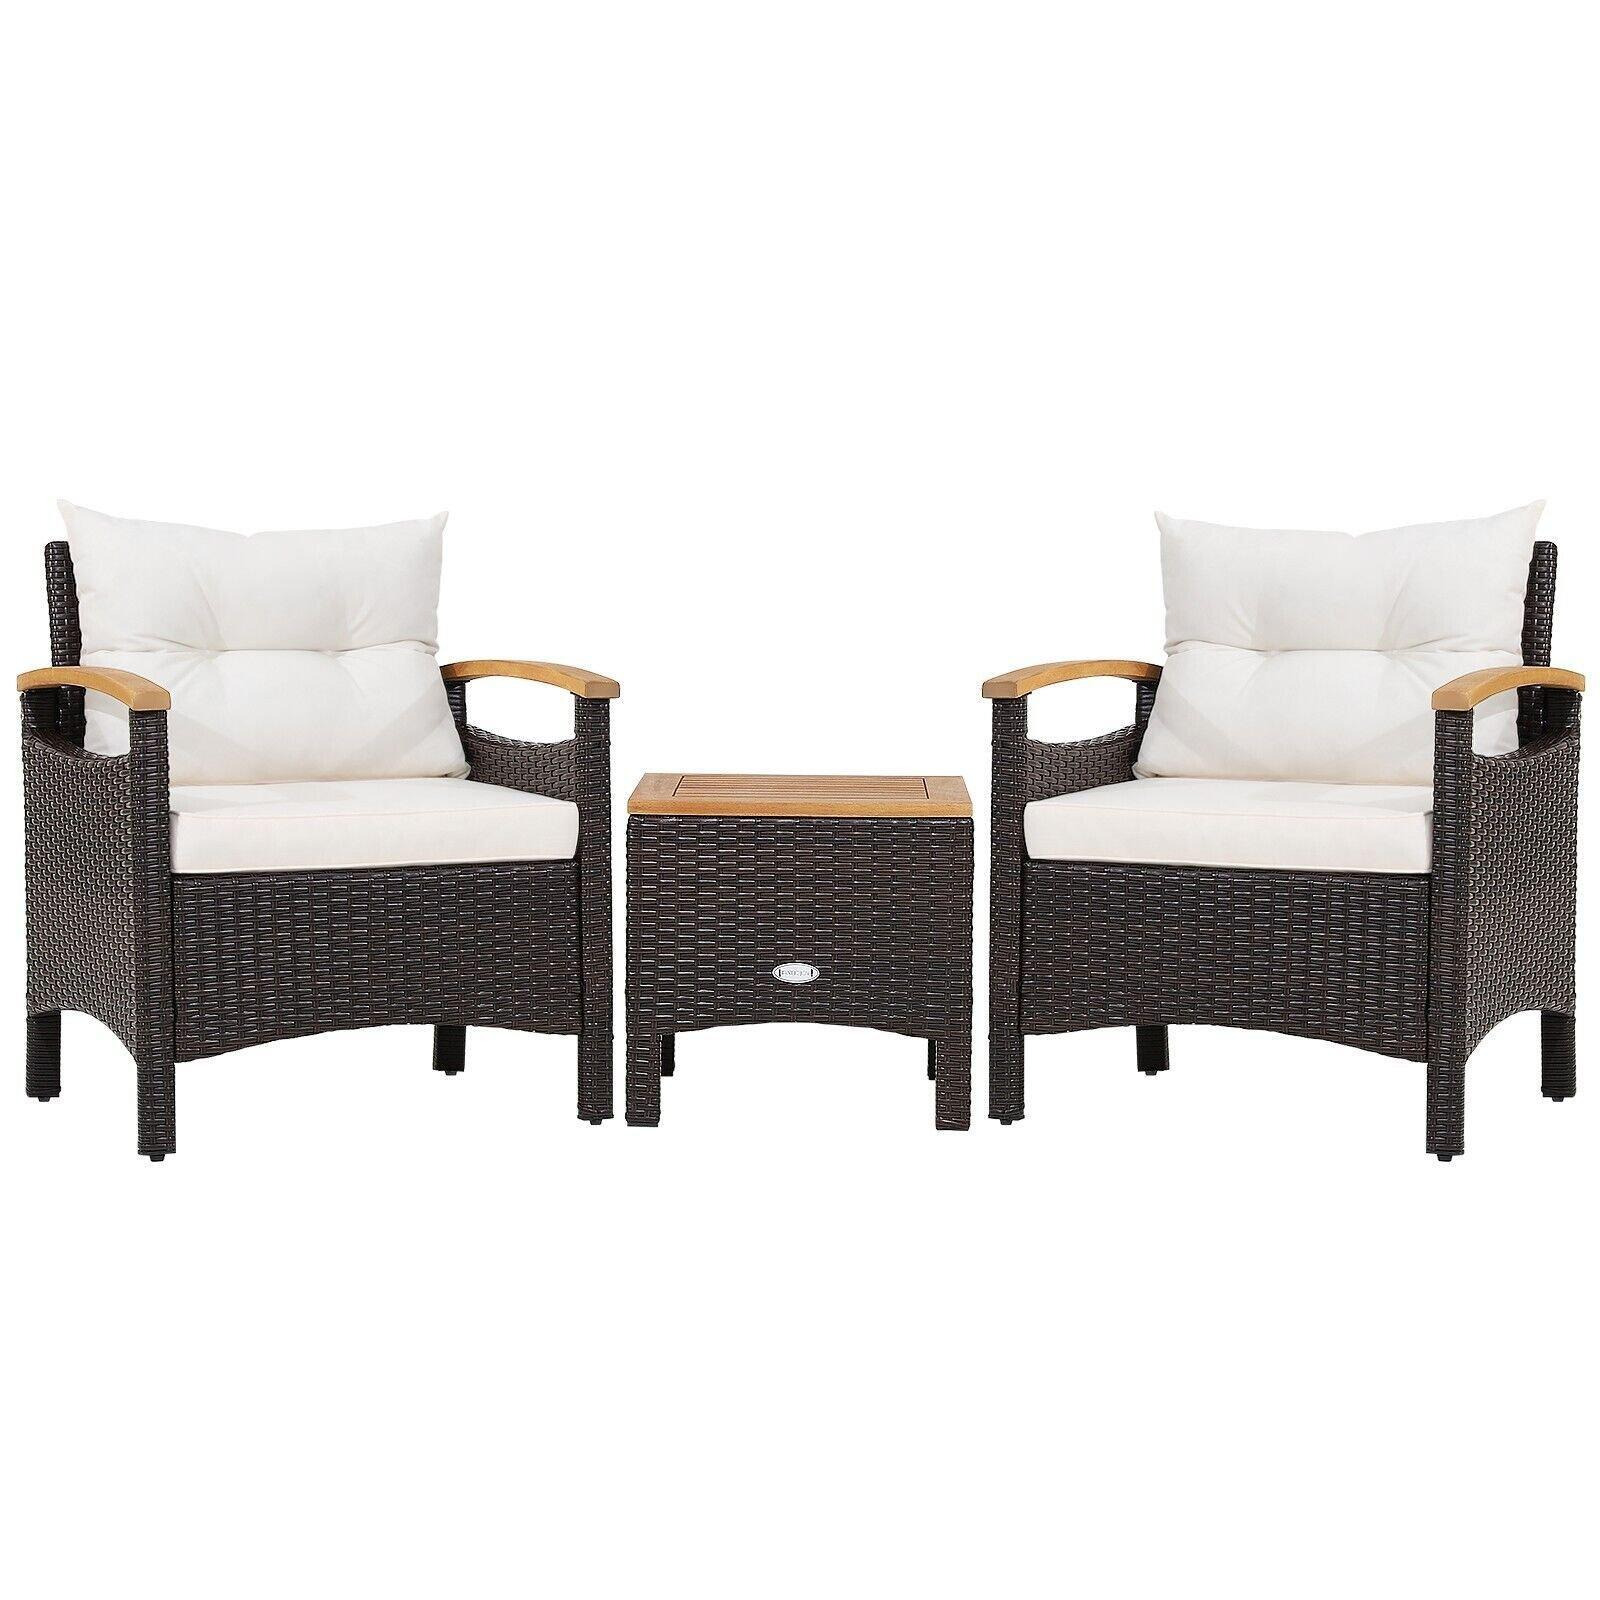 3pcs Patio Furniture Set Outdoor Rattan Sofa Set with Coffee Table Conversation - image 1